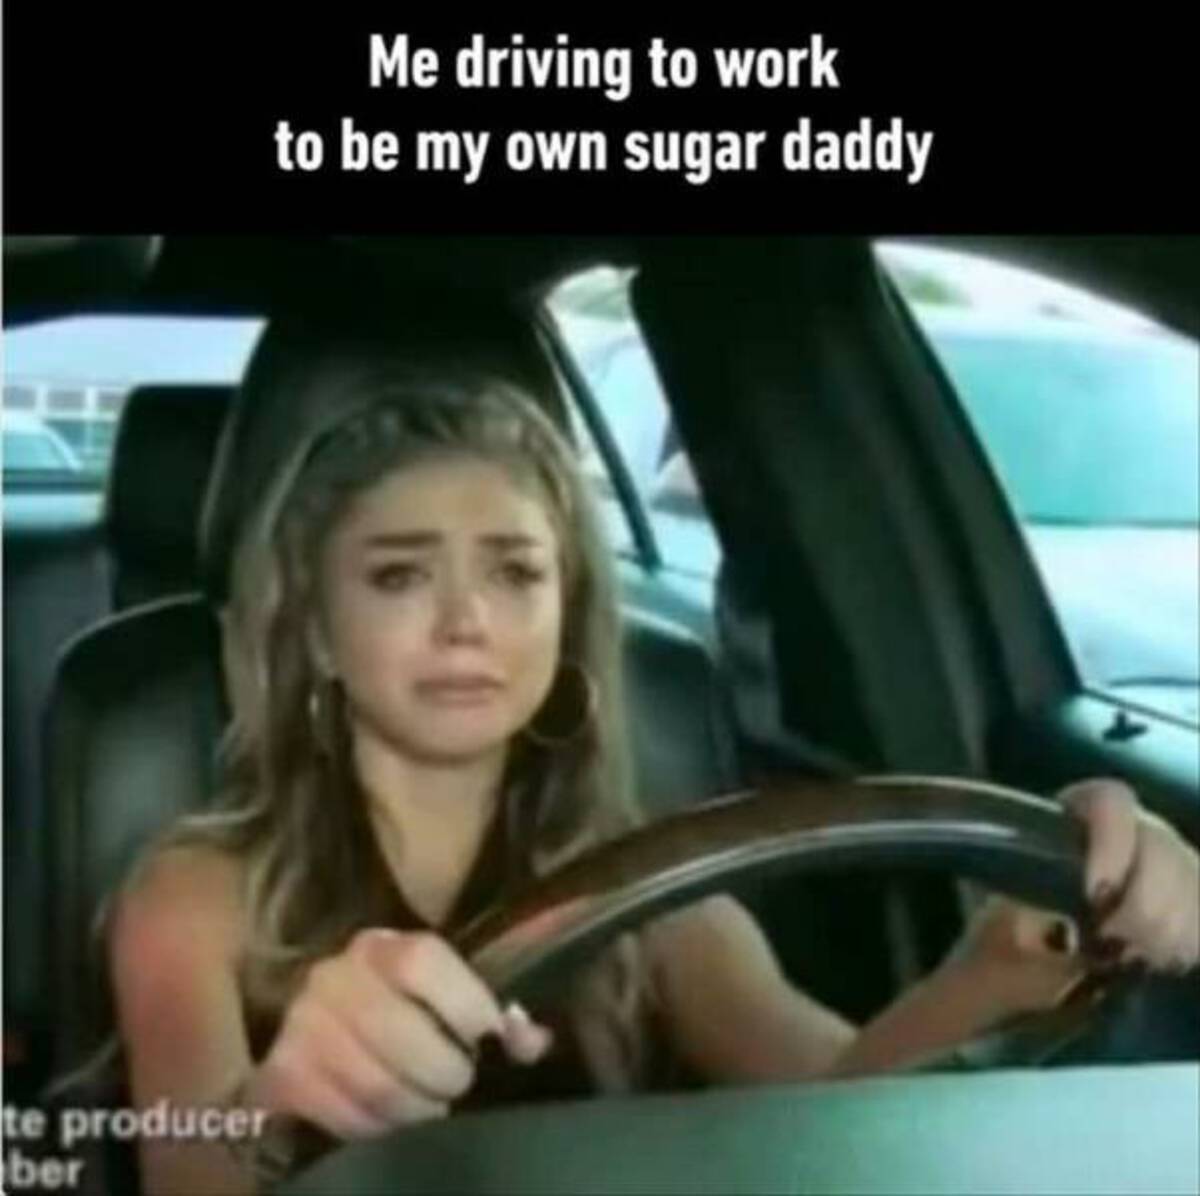 te producer ber Me driving to work to be my own sugar daddy